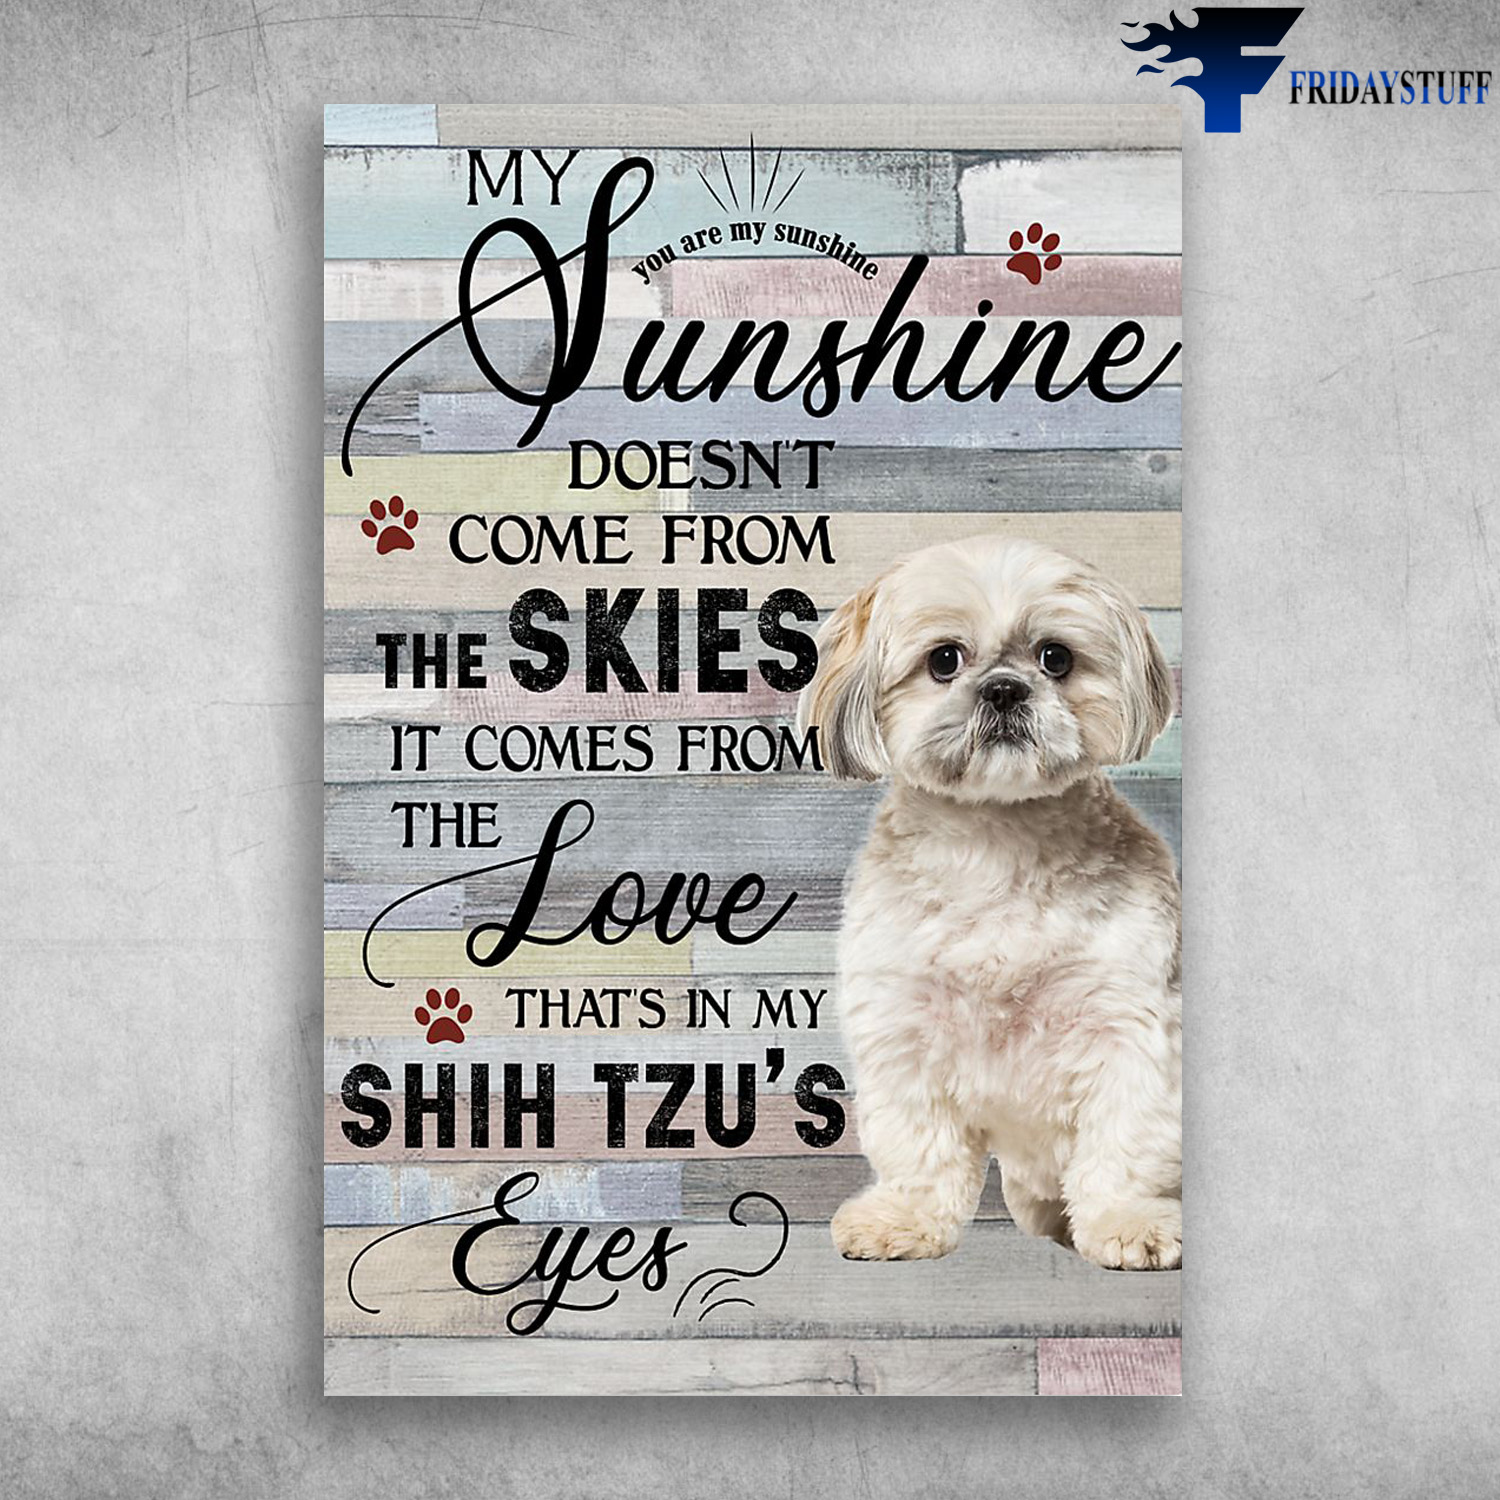 SHih Tzu Dog - My Sunshine Doesn't Come From The Shies, It Comes From The Love That In My Shih Tzu's Eye